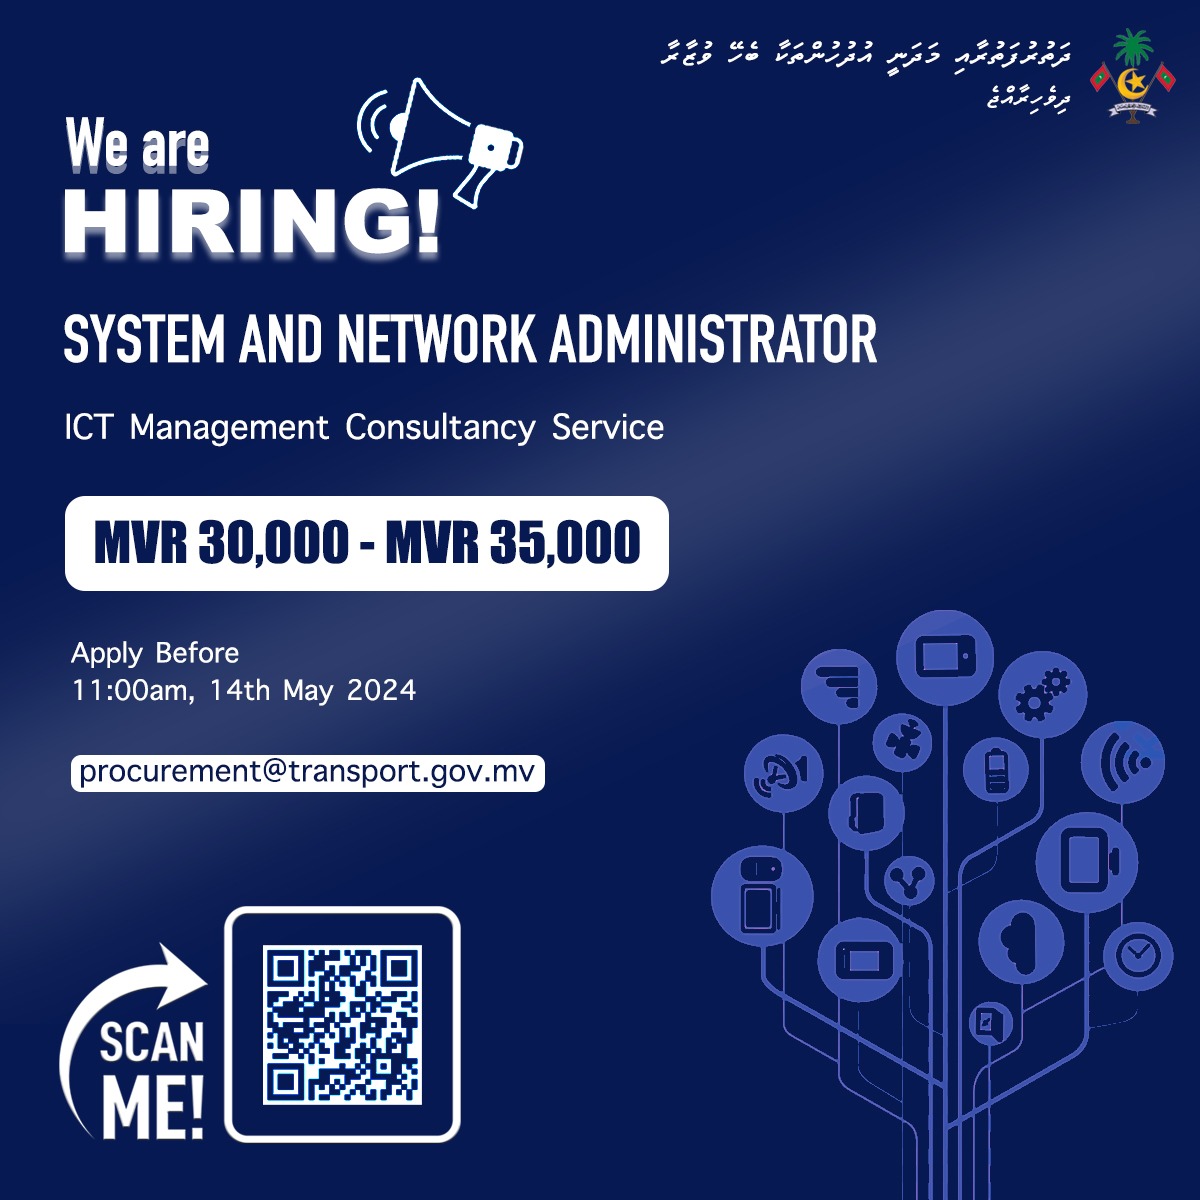 Seeking an experienced System and Network Administrator to join our team. Apply now to be a crucial part of our tech team. gazette.gov.mv/iulaan/287901